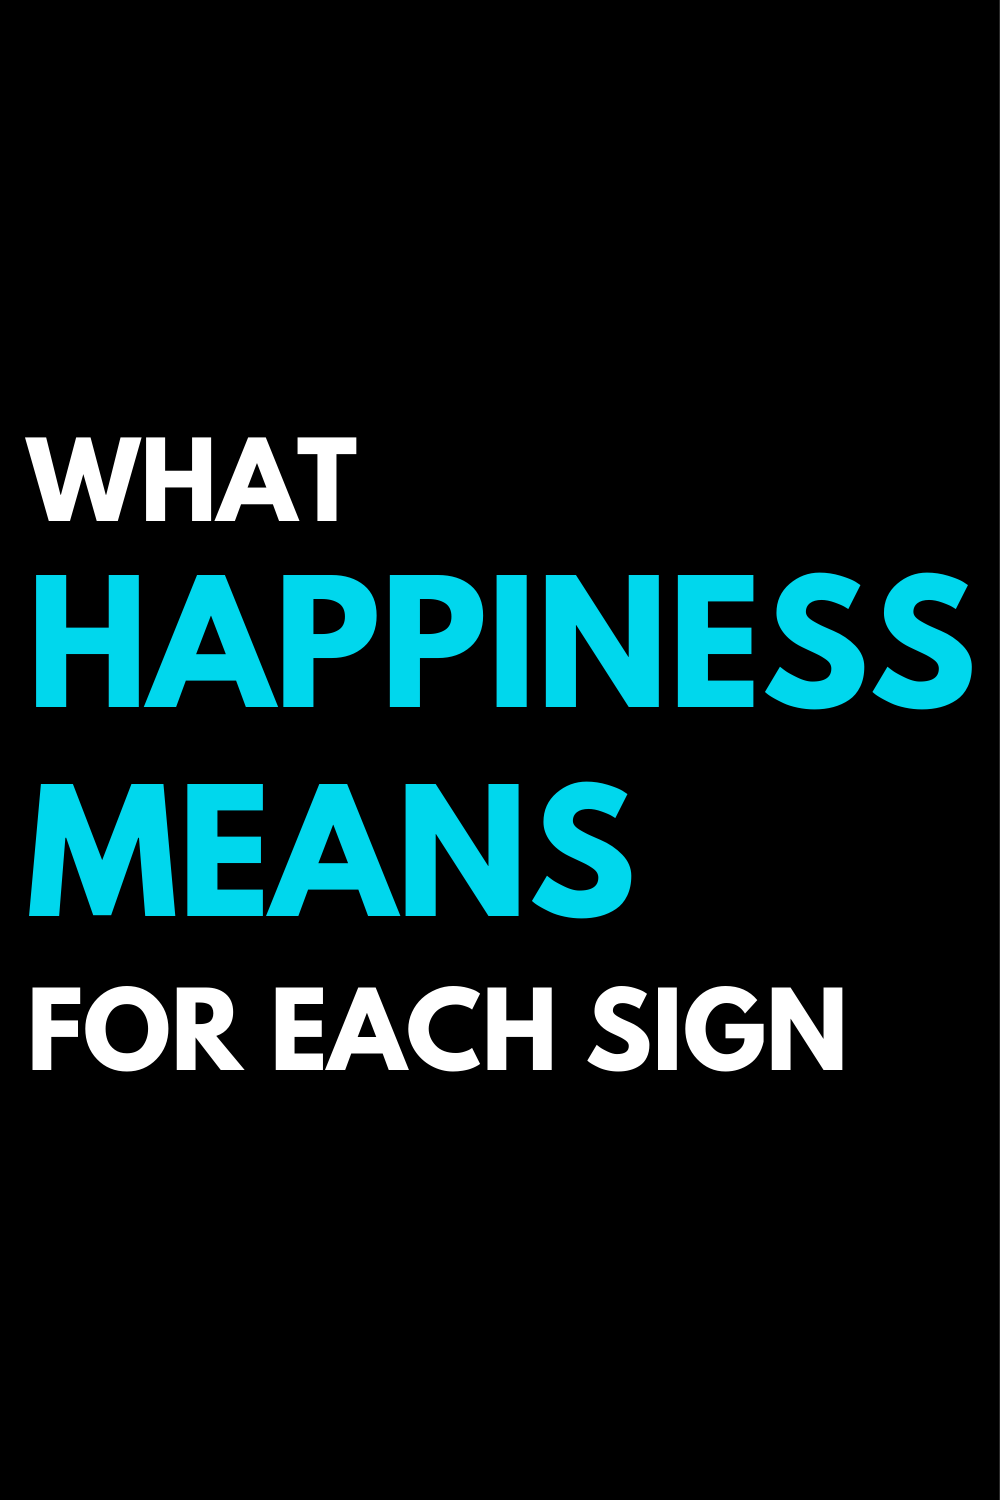 What happiness means for each sign